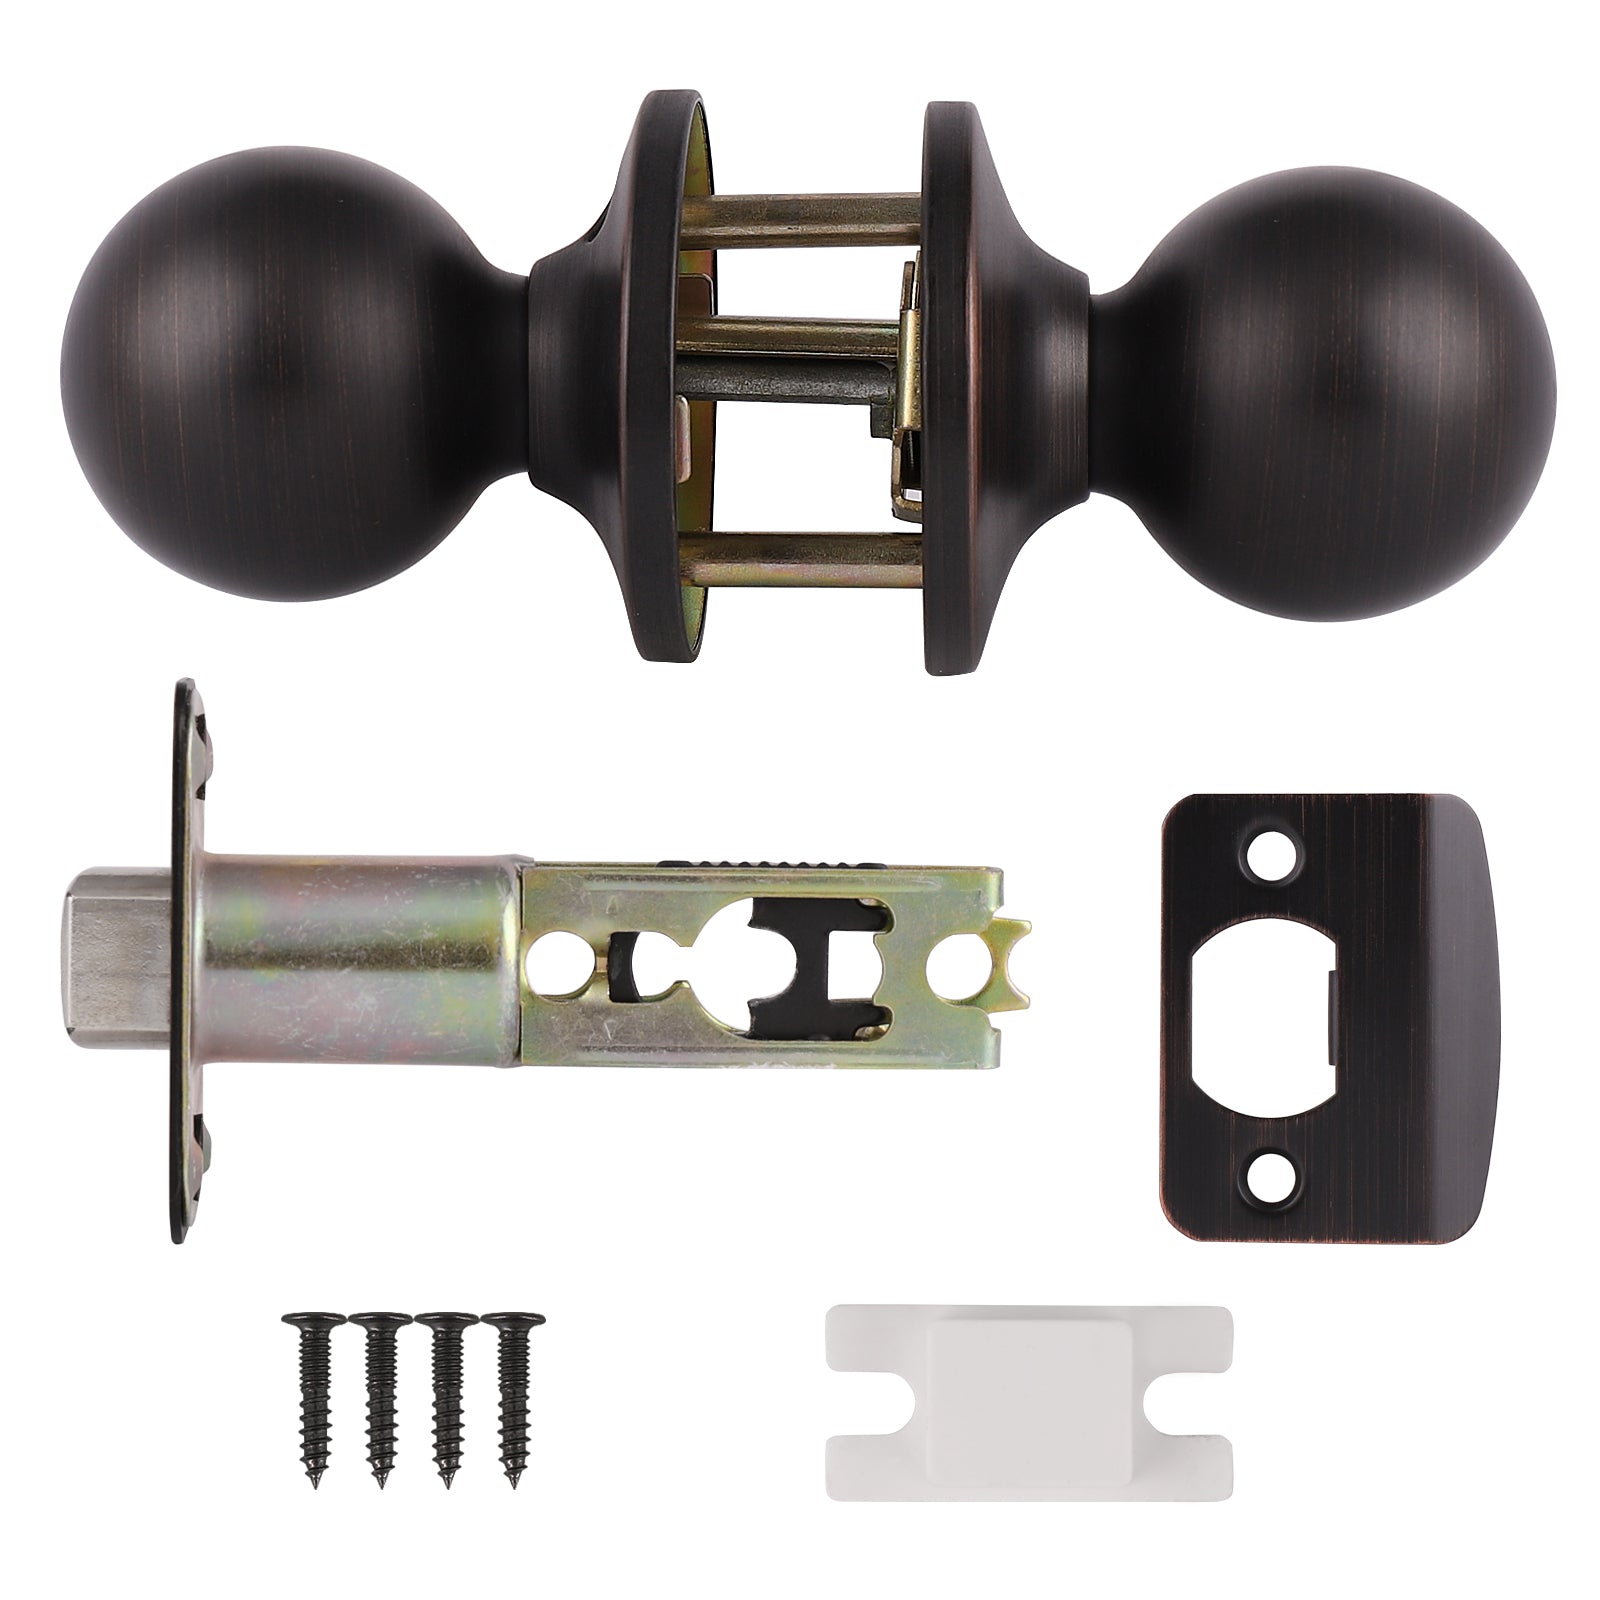 Round Ball Door Knobs Keyledd Passage Function for Closet Hall, Oil Rubbed Bronze Finish- DL5763ORBPS